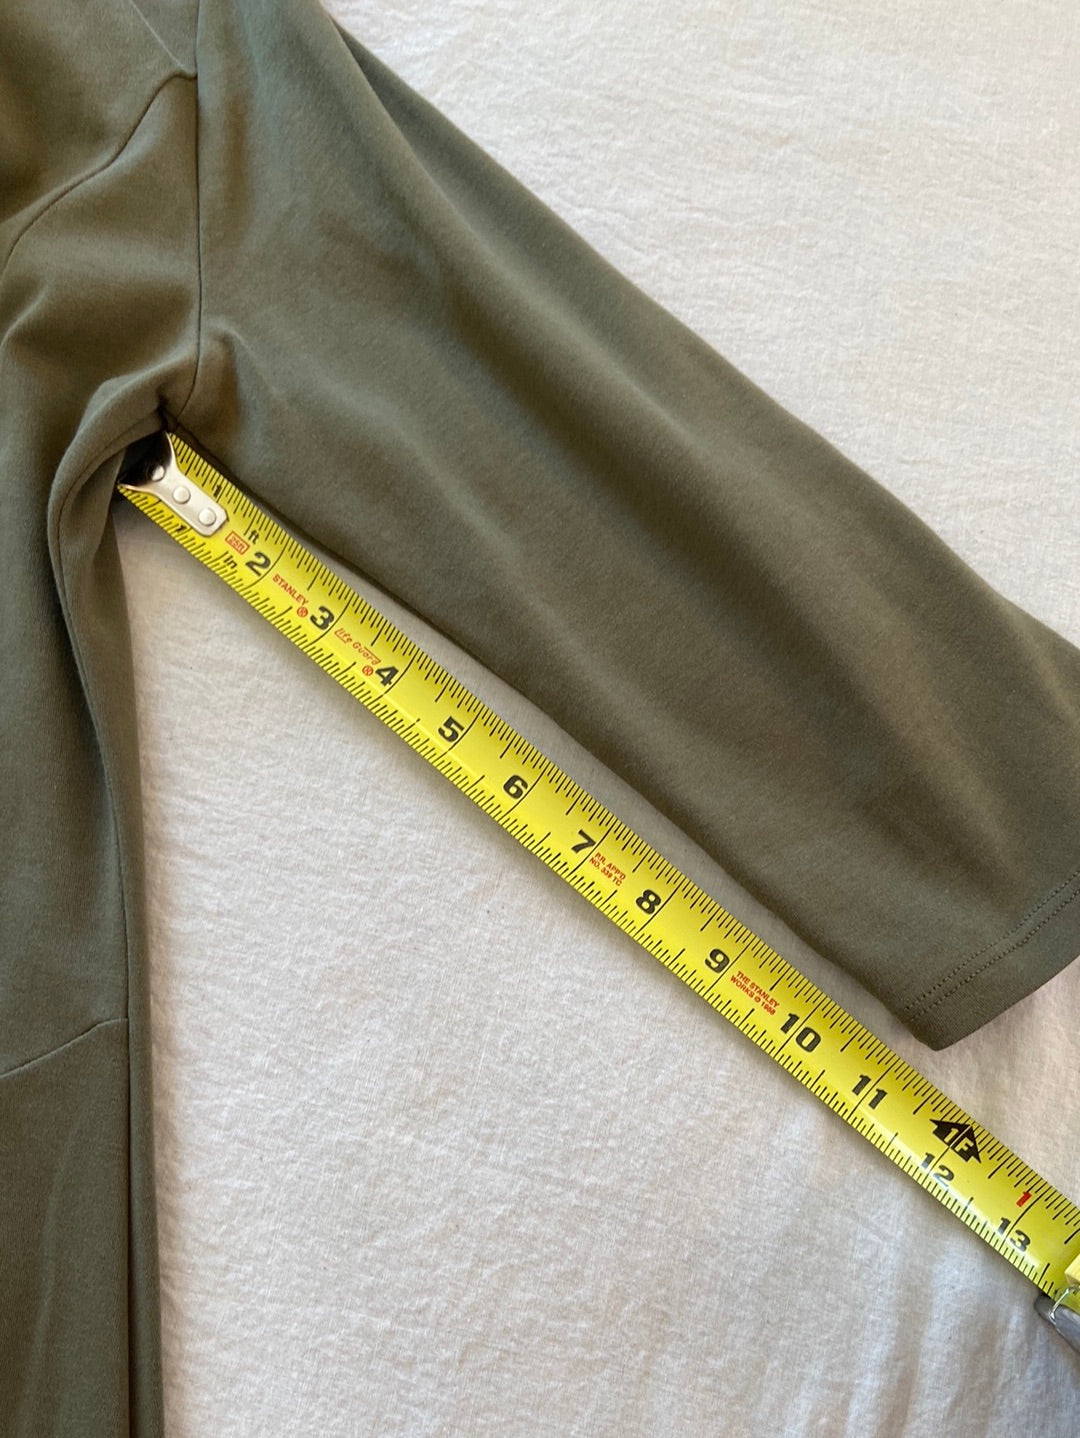 OLIVE GREEN New York and Co Size M